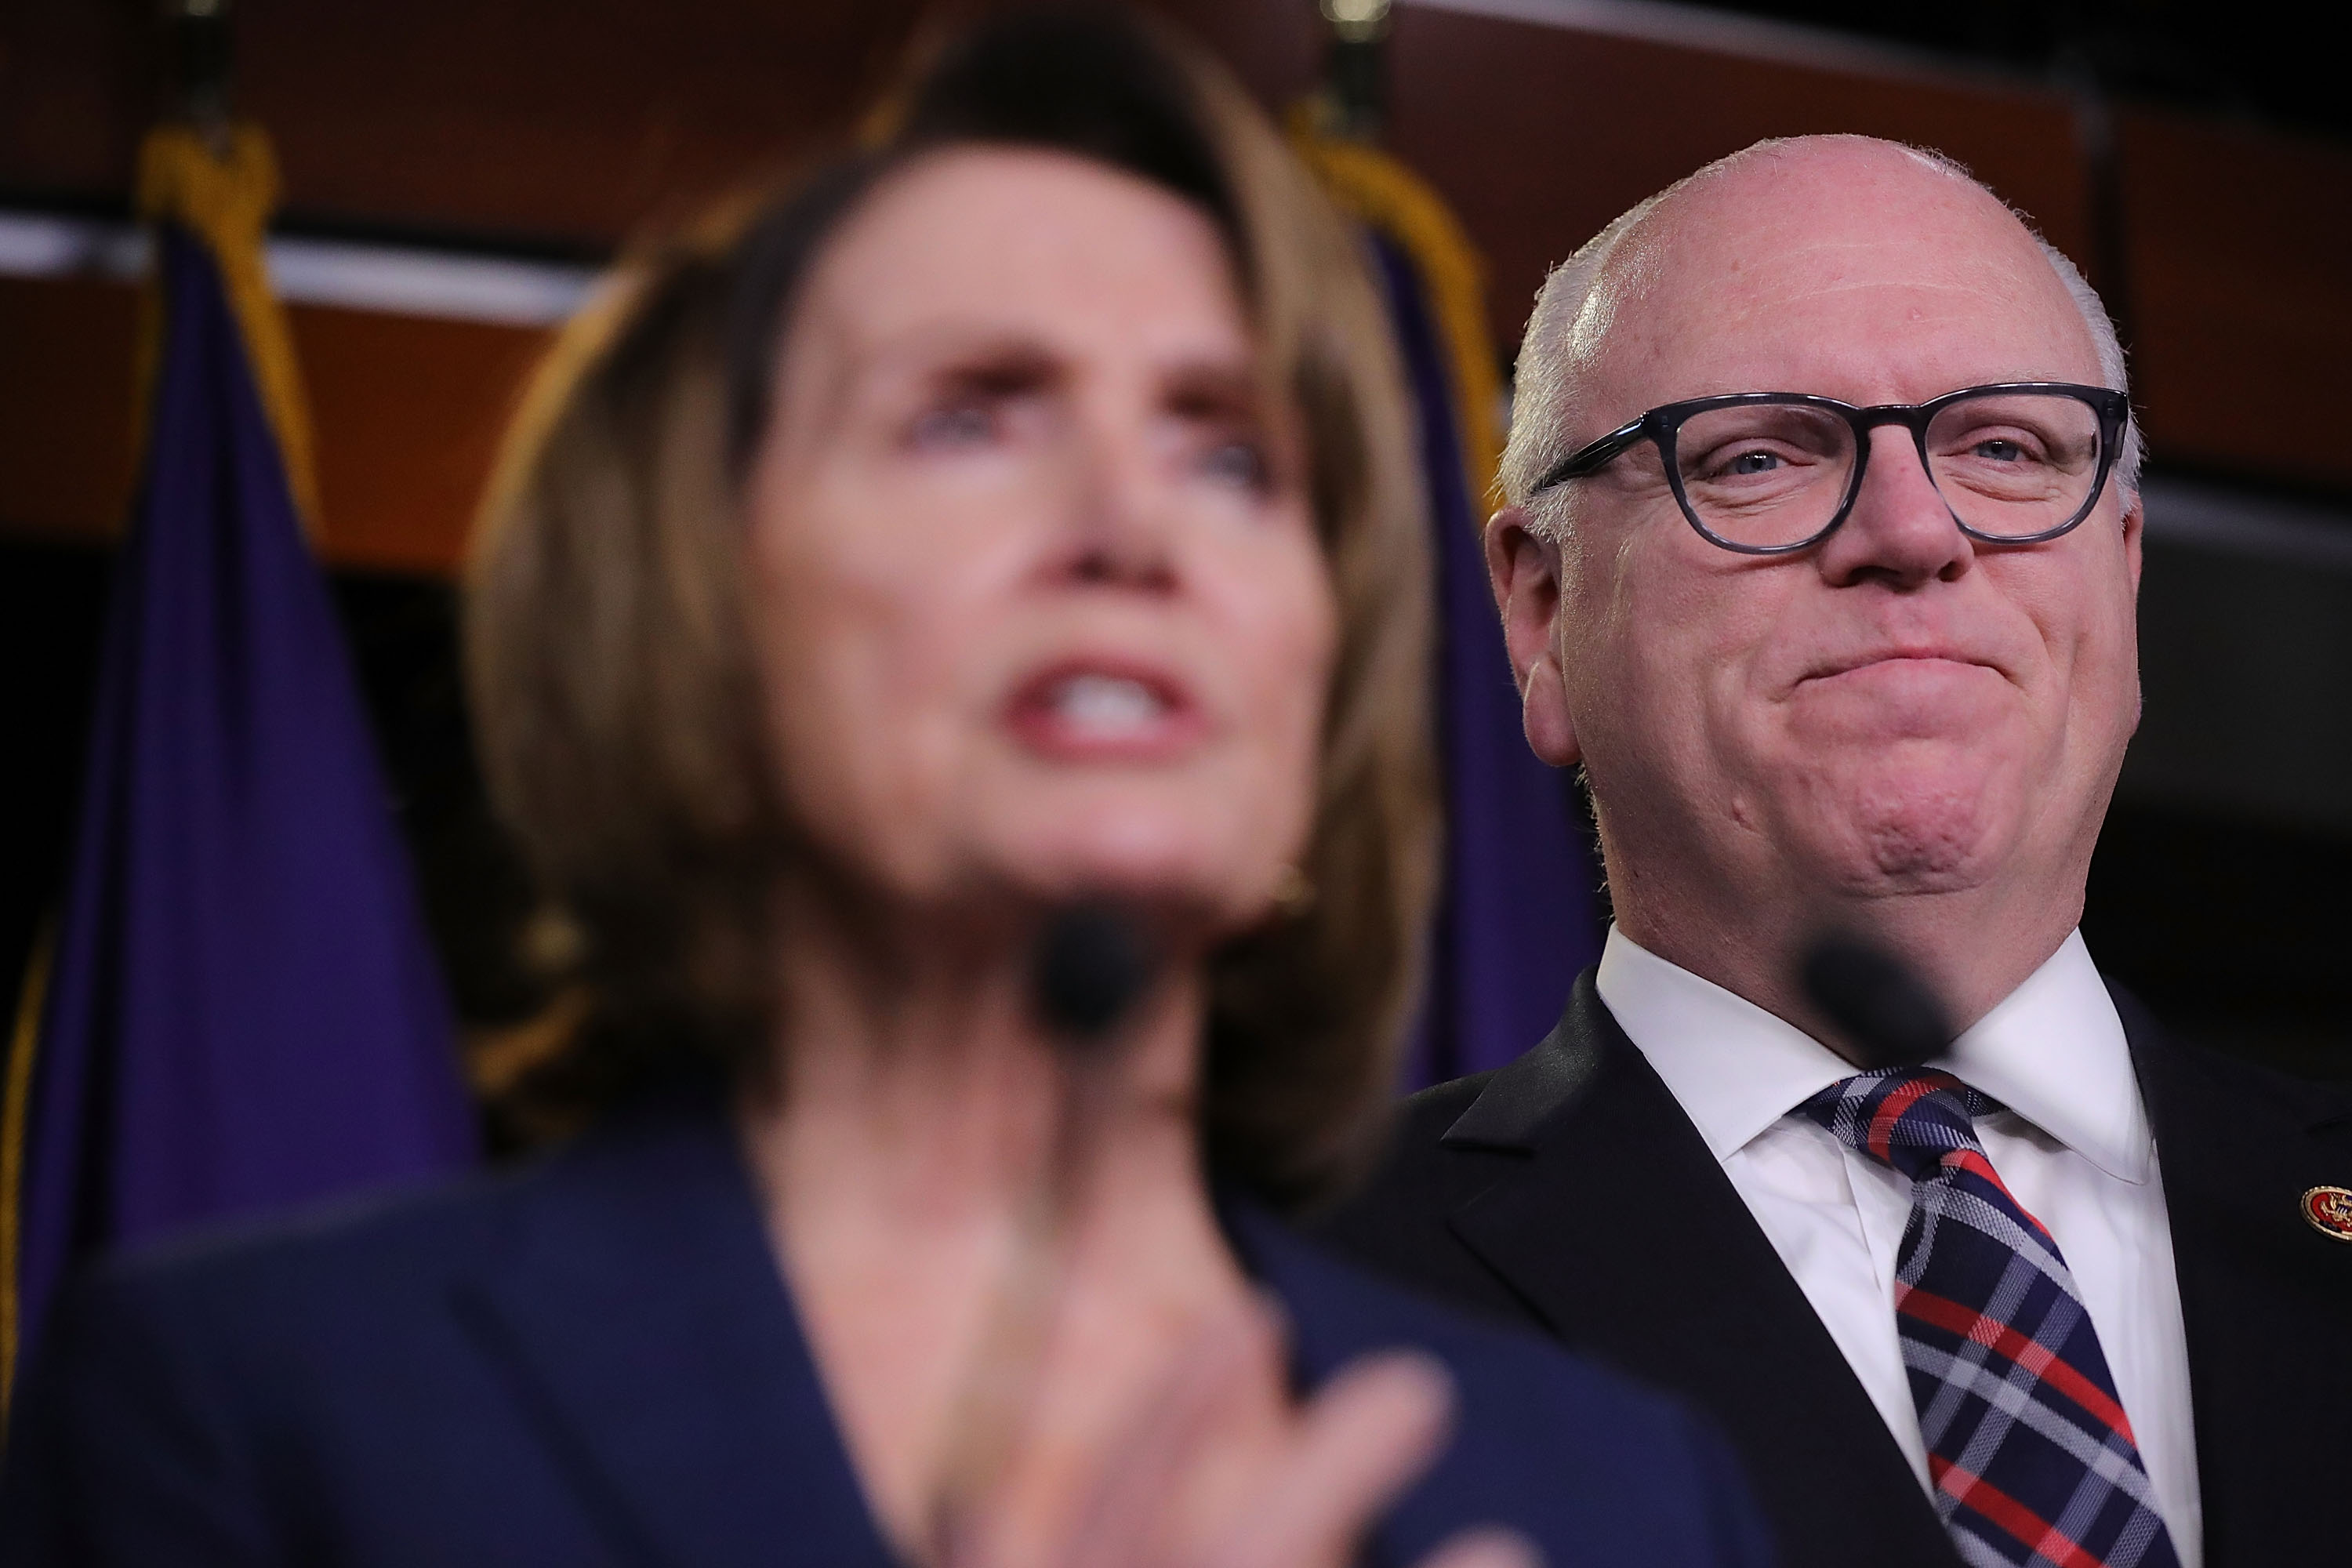 Rep. Joseph Crowley and House Minority Leader Nancy Pelosi following a meeting of the House Democratic caucus at the U.S. Capitol in Washington, D.C., on Jan. 31, 2018. (Chip Somodevilla—Getty Images)